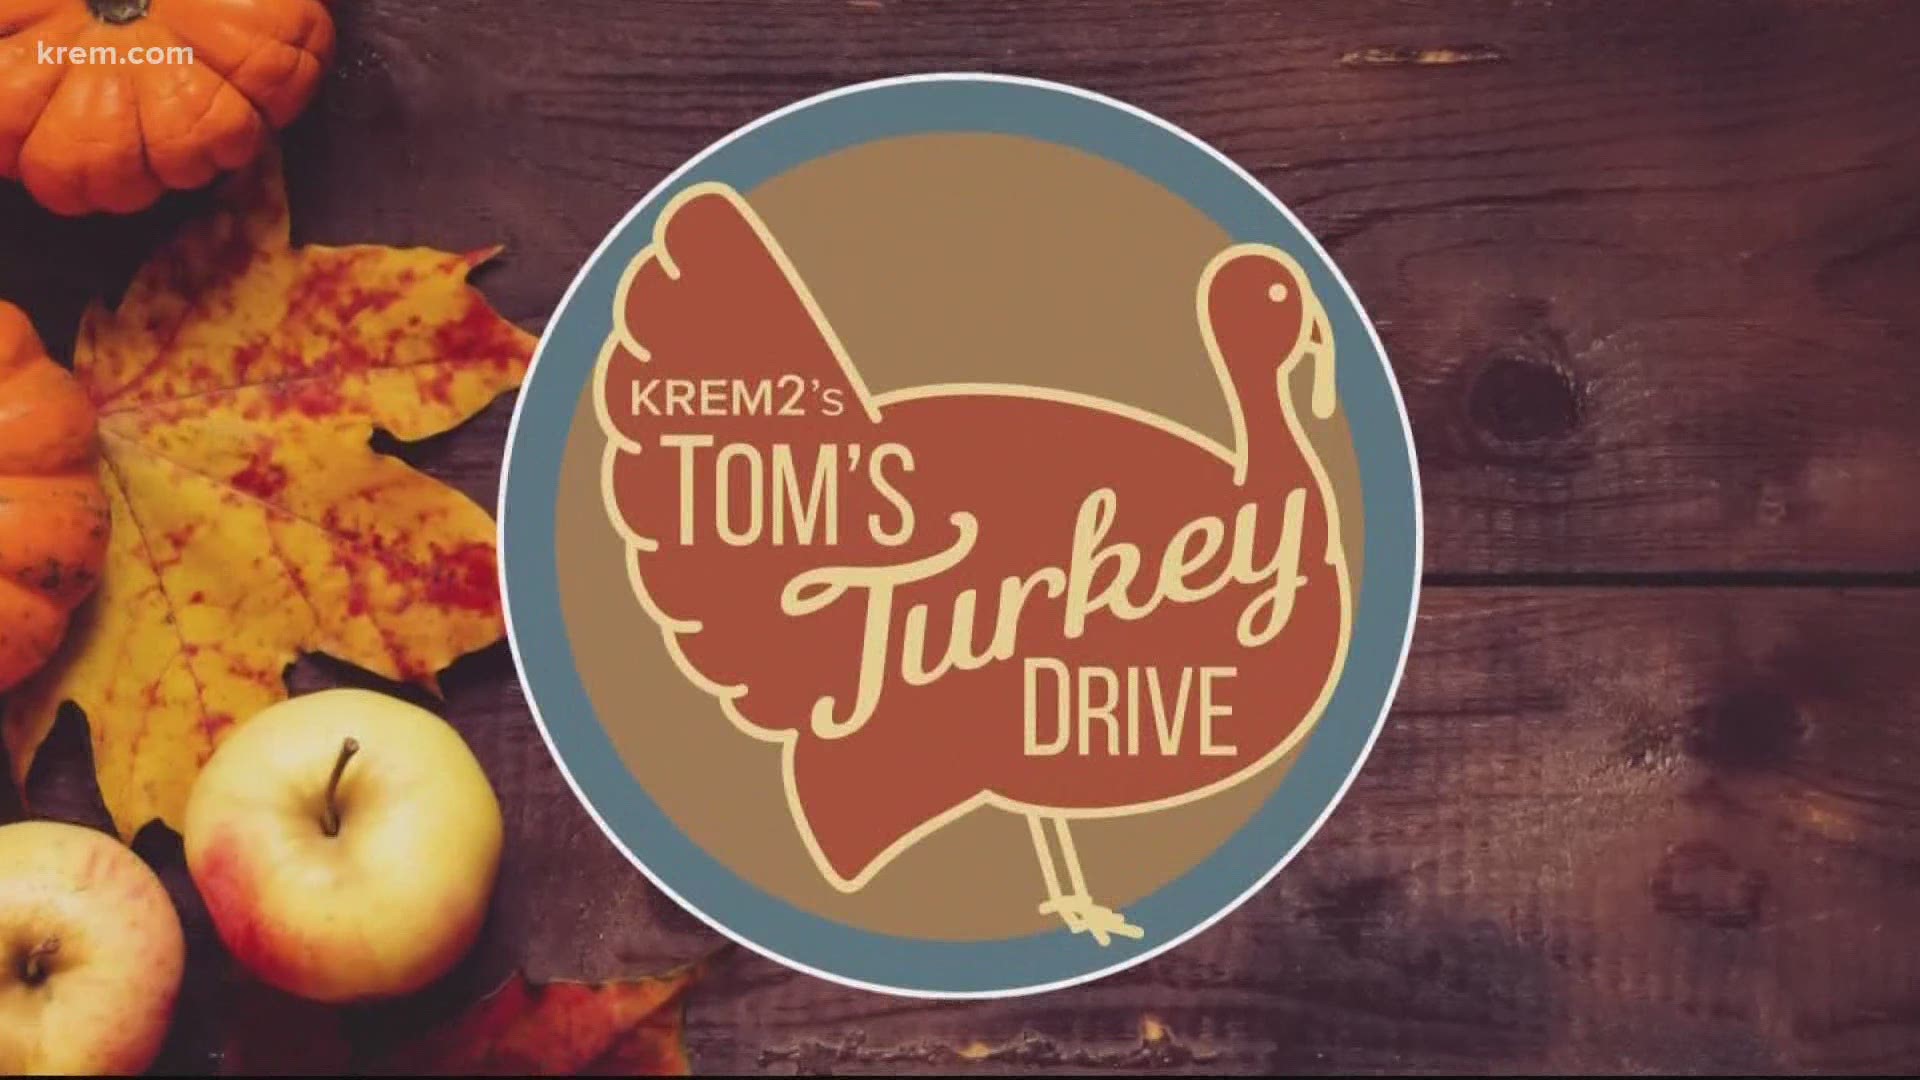 Avista is one of the many local companies to make a donation to Tom's Turkey Drive in 2020.